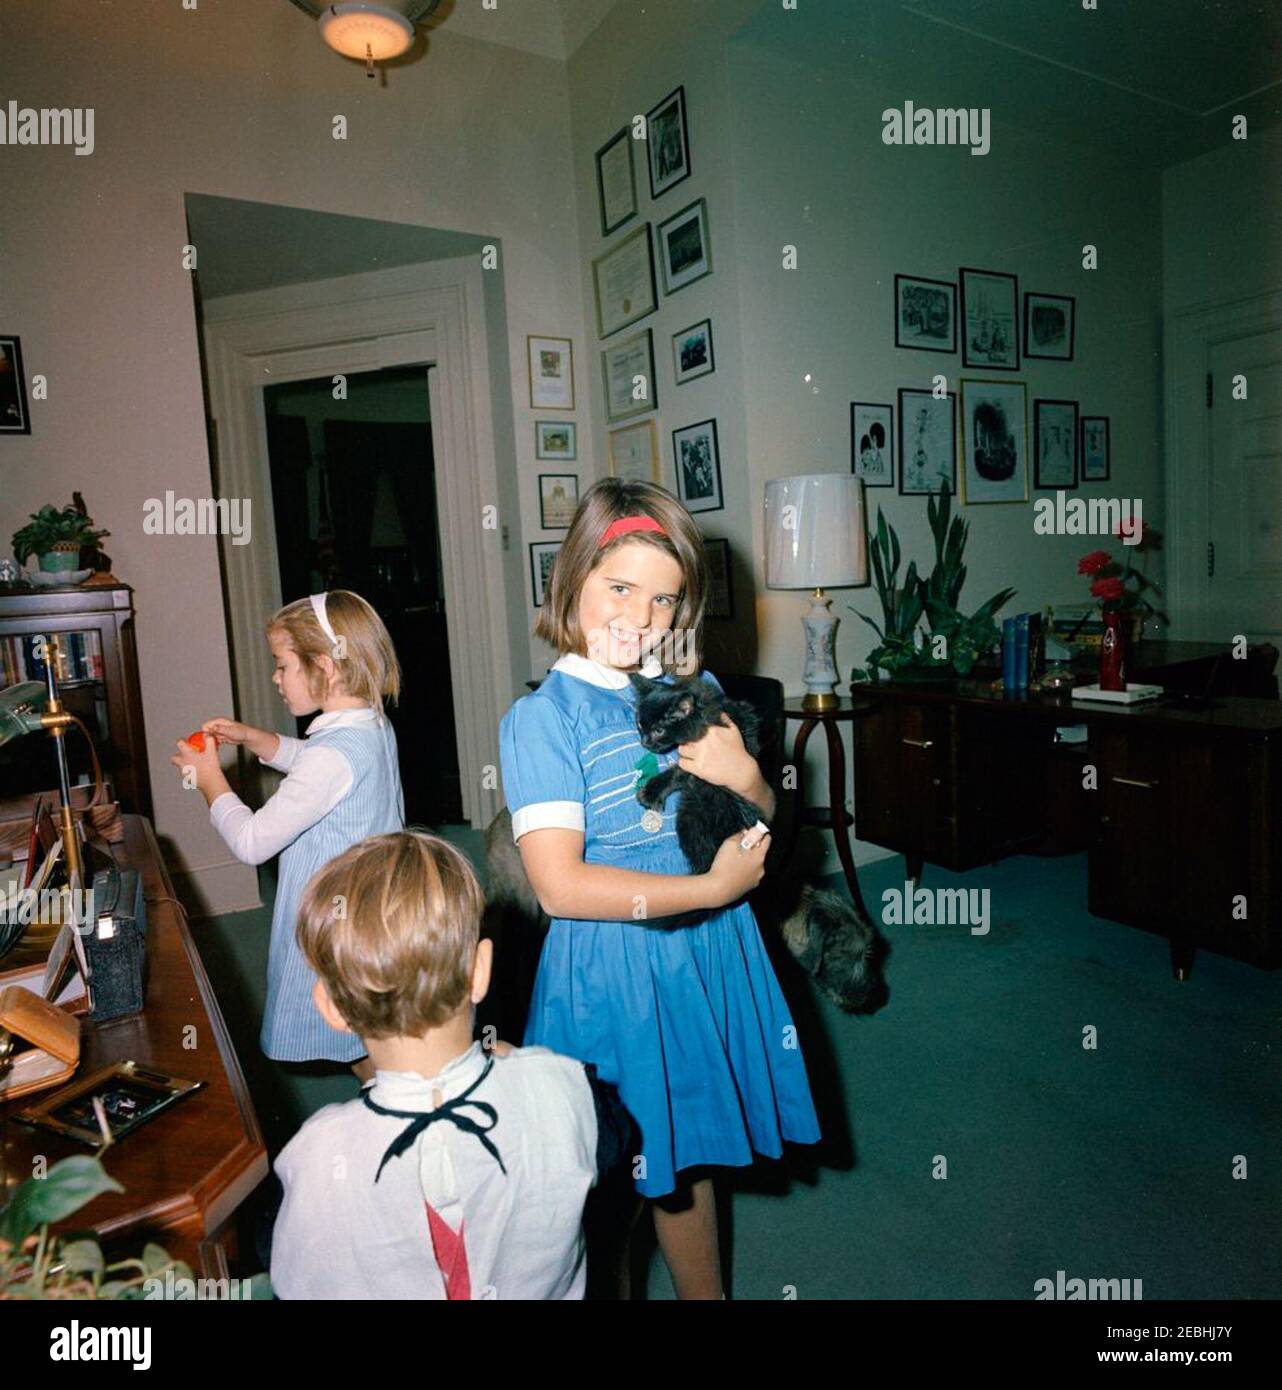 President Kennedy with Caroline Kennedy (CBK) u0026 John F. Kennedy, Jr. (JFK, Jr.), in Halloween costumes. Caroline Kennedy, John F. Kennedy, Jr., and Maria Shriver (holding a cat) play in the office of President John F. Kennedyu2019s Personal Secretary, Evelyn Lincoln. Kennedy family dog, Wolf, stands in background. White House, Washington, D.C. Stock Photo